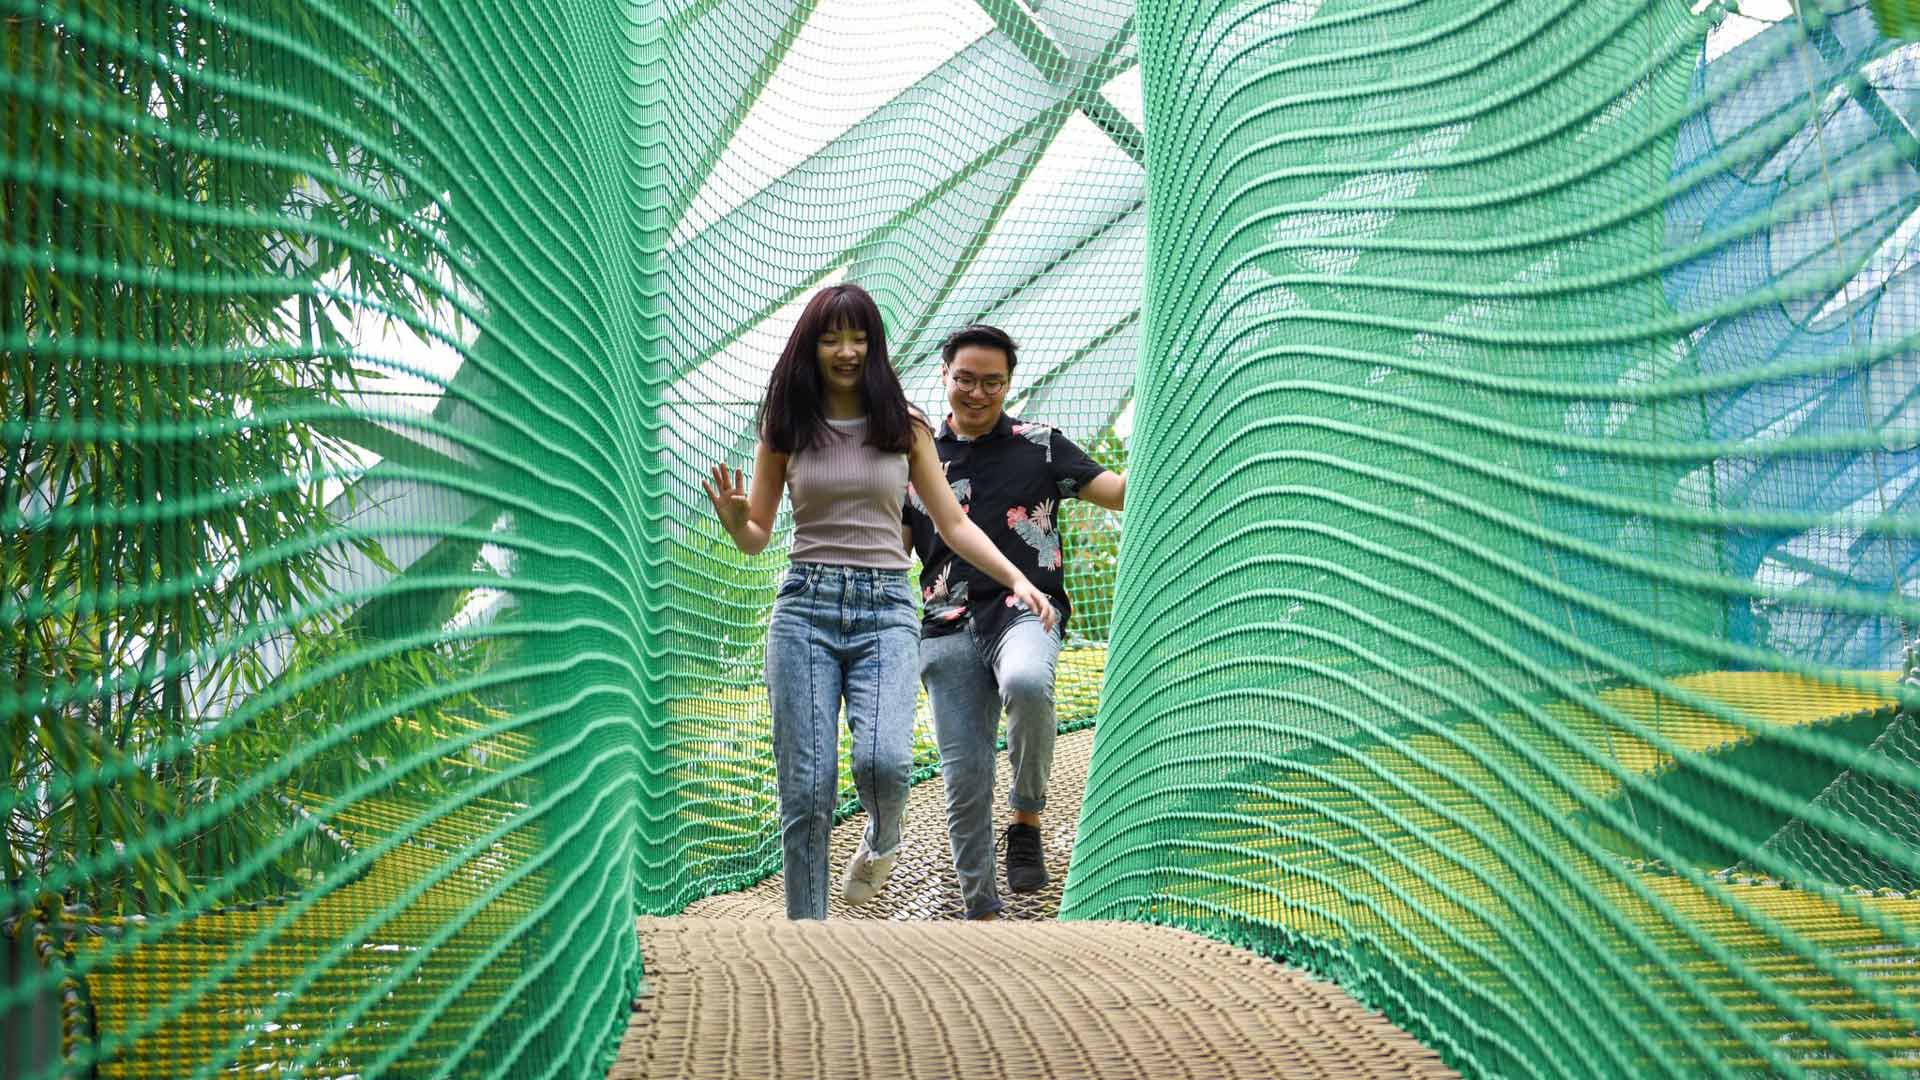 A 500-Square-Metre Mirror and Hedge Maze Has Just Opened Inside Singapore's Changi Airport